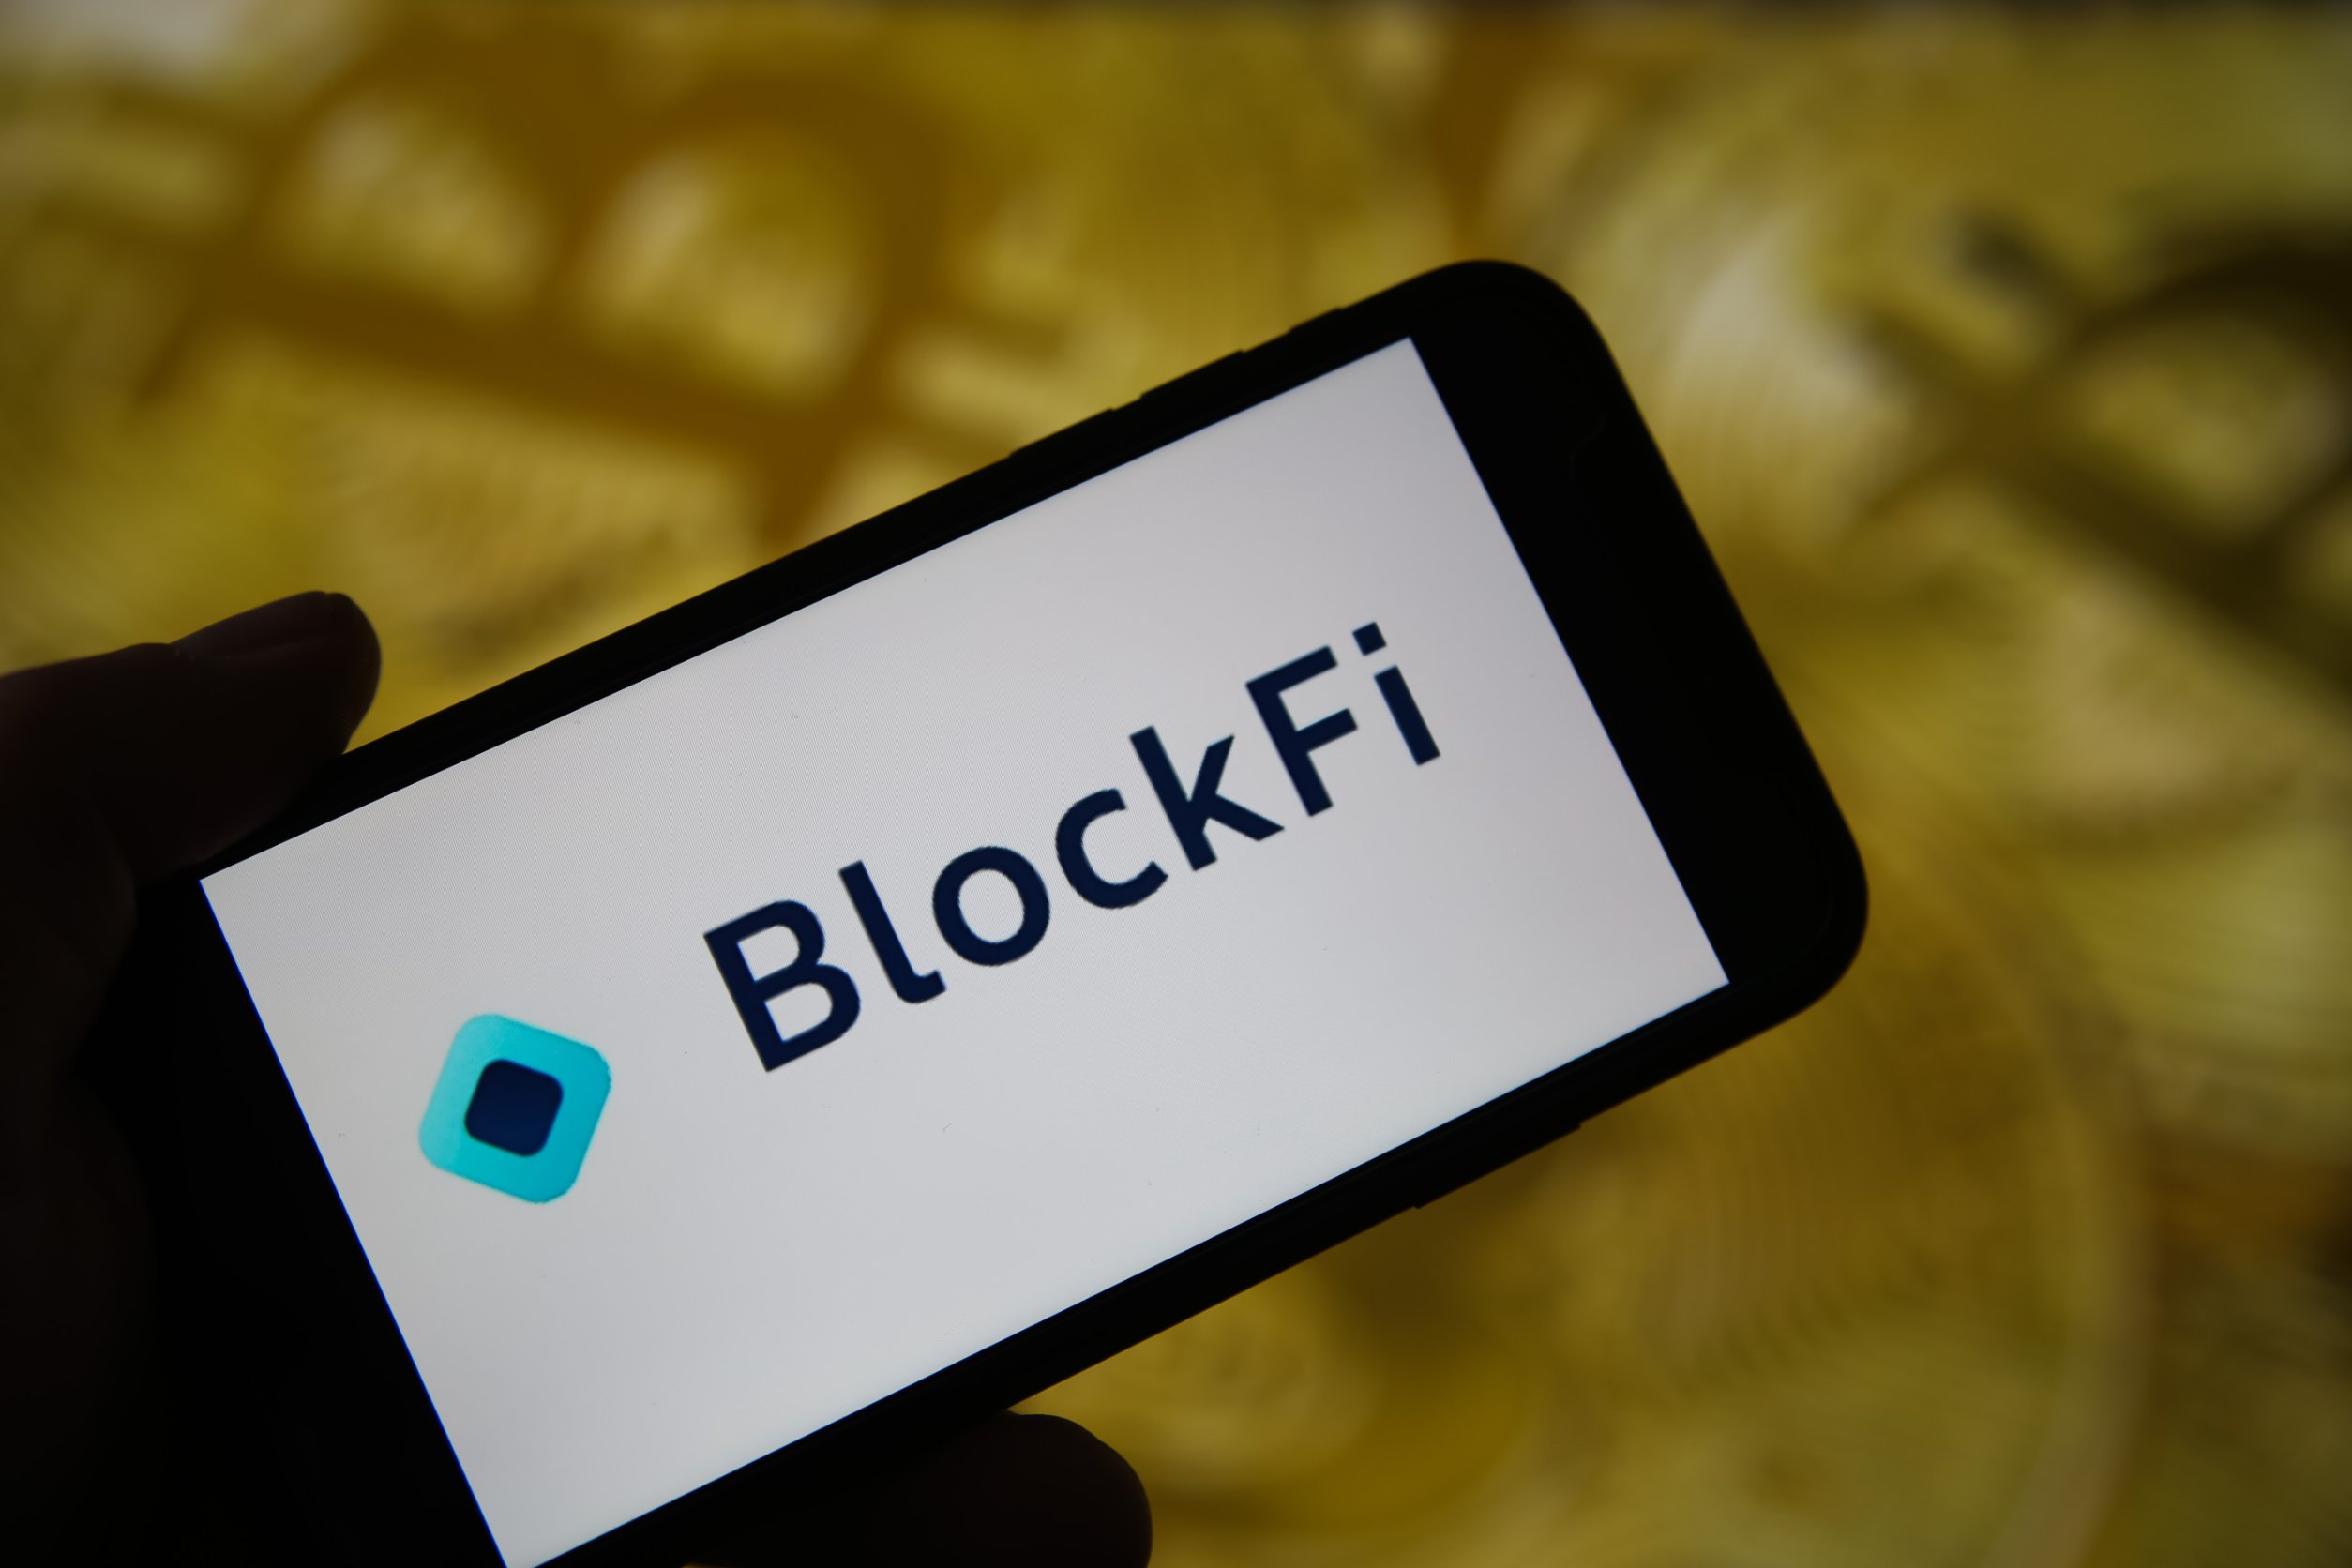 Sam Bankman-Fried commits $250M to BlockFi: read the details here